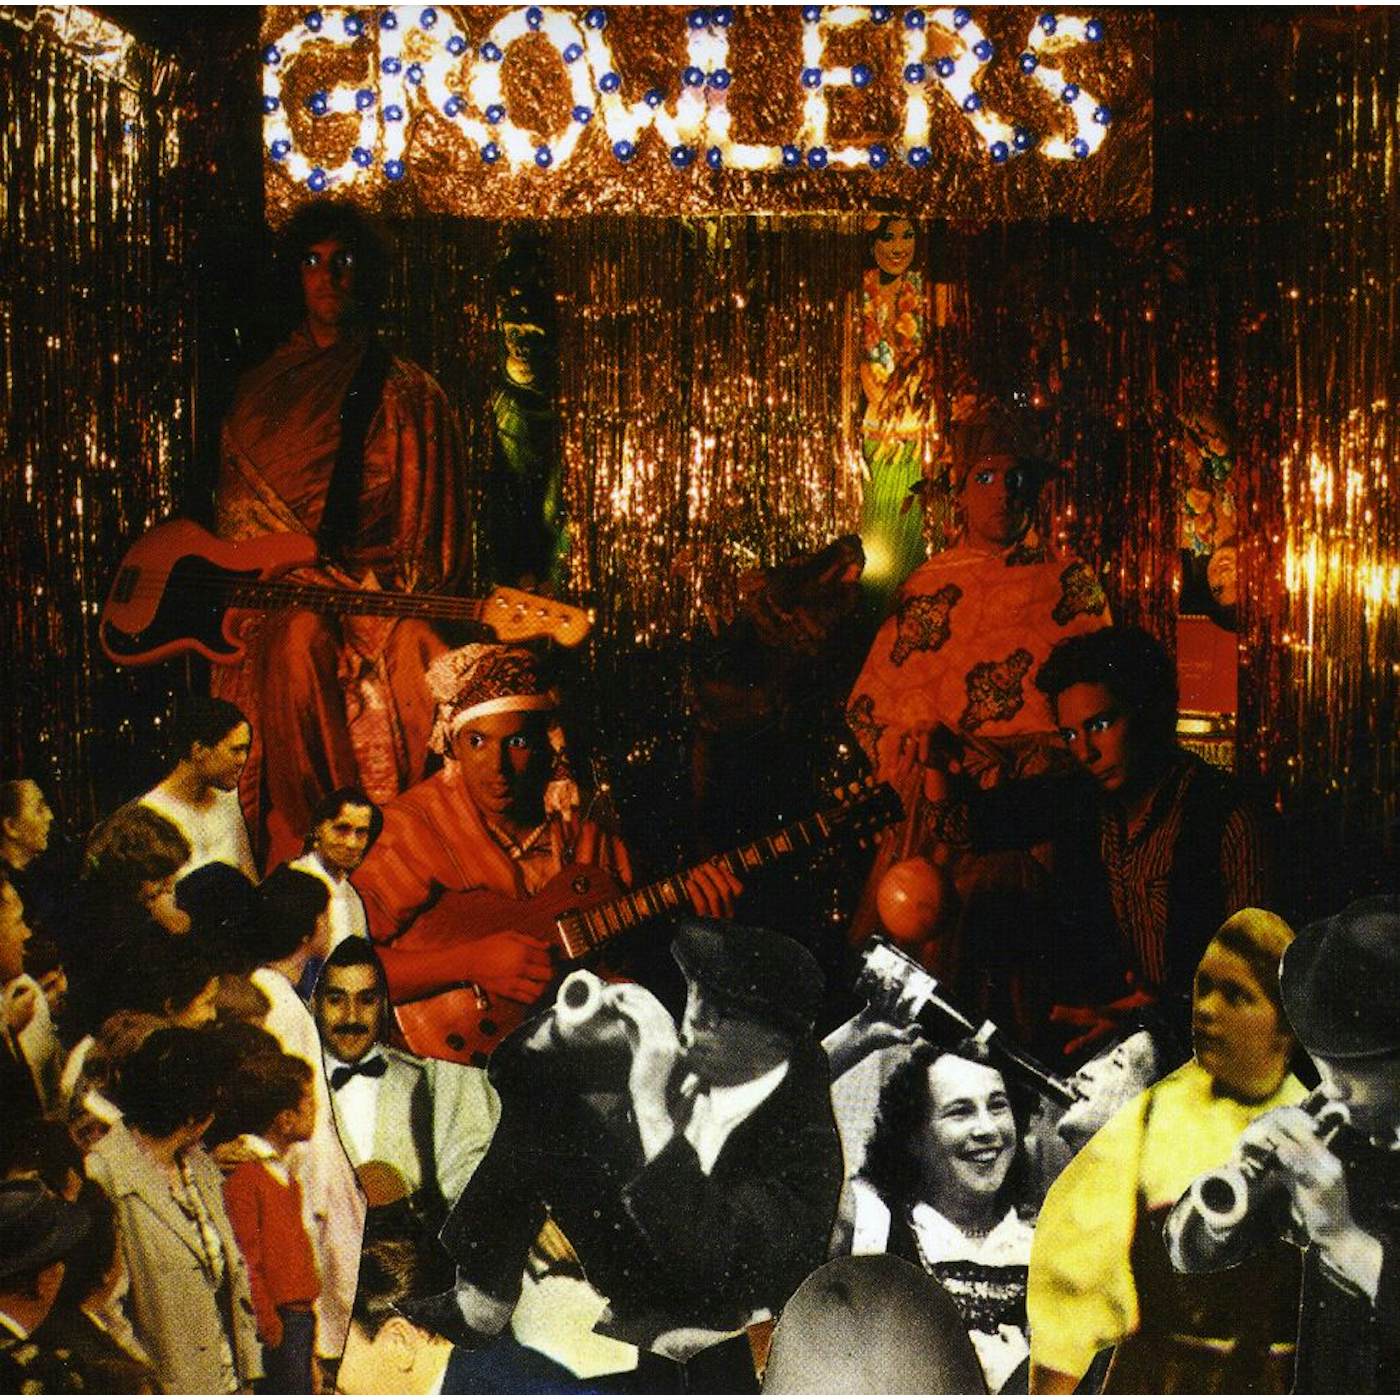 The Growlers ARE YOU IN OR OUT CD